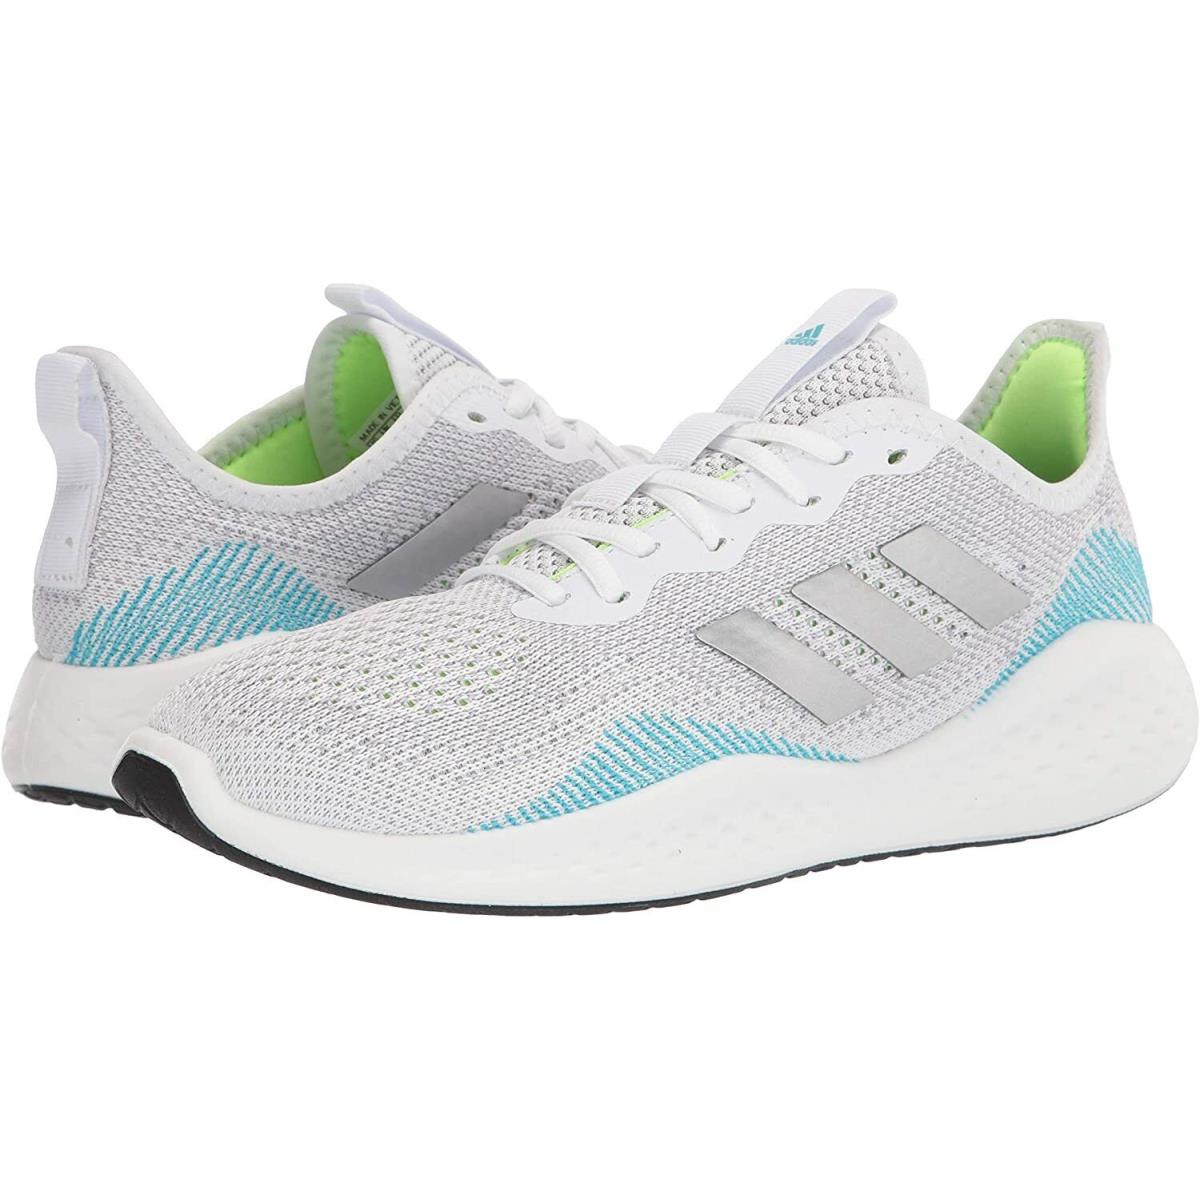 Men`s Shoes Adidas Fluidflow Bounce Lace Up Athletic Sneakers FW5080 White - White